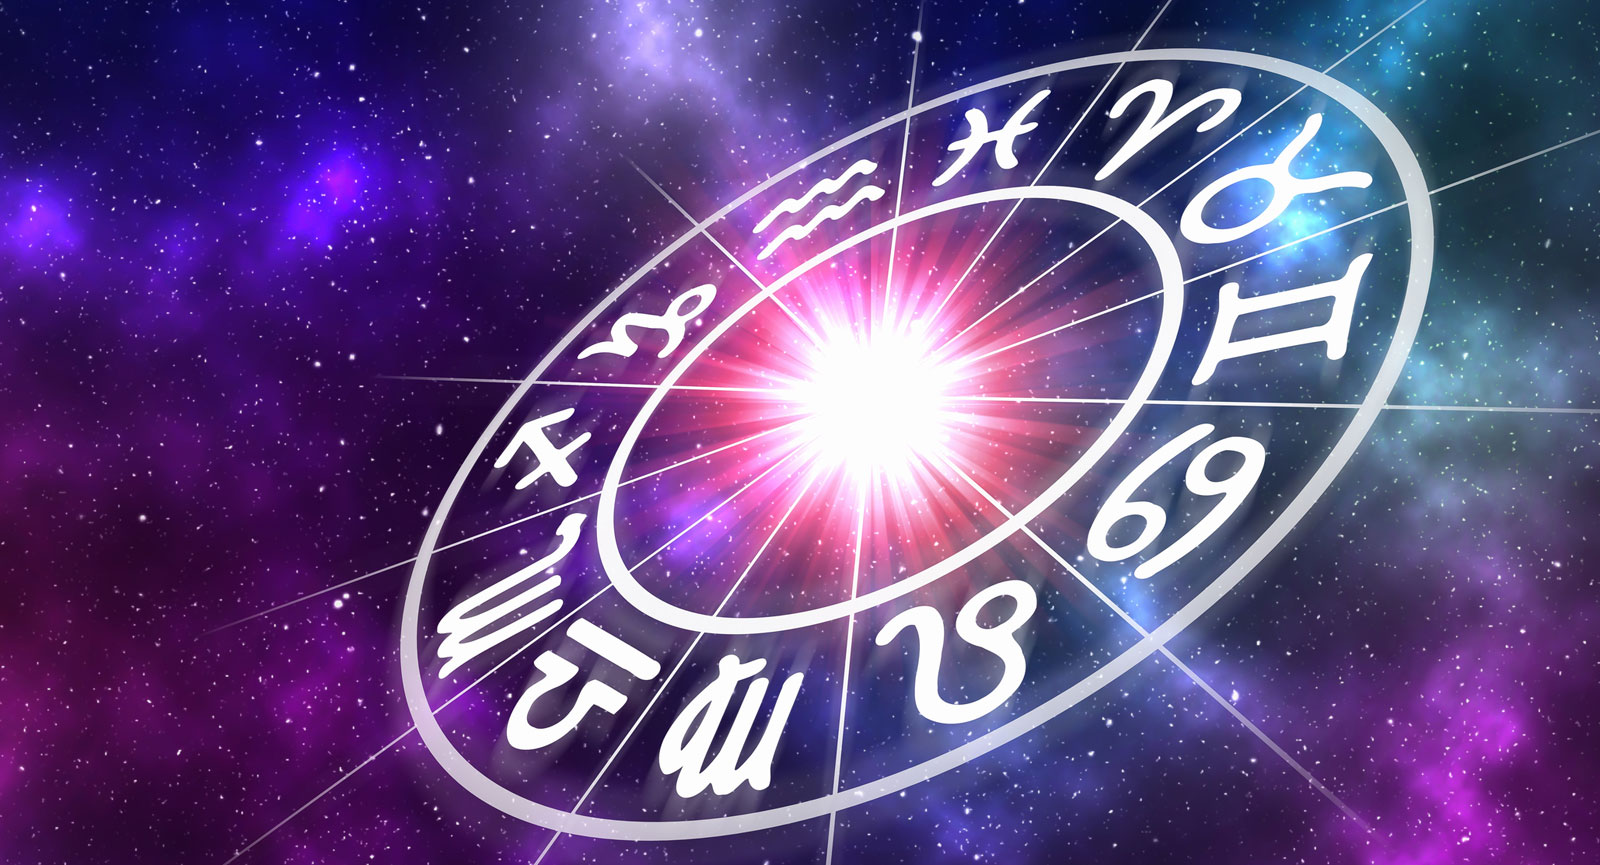 About Astrology